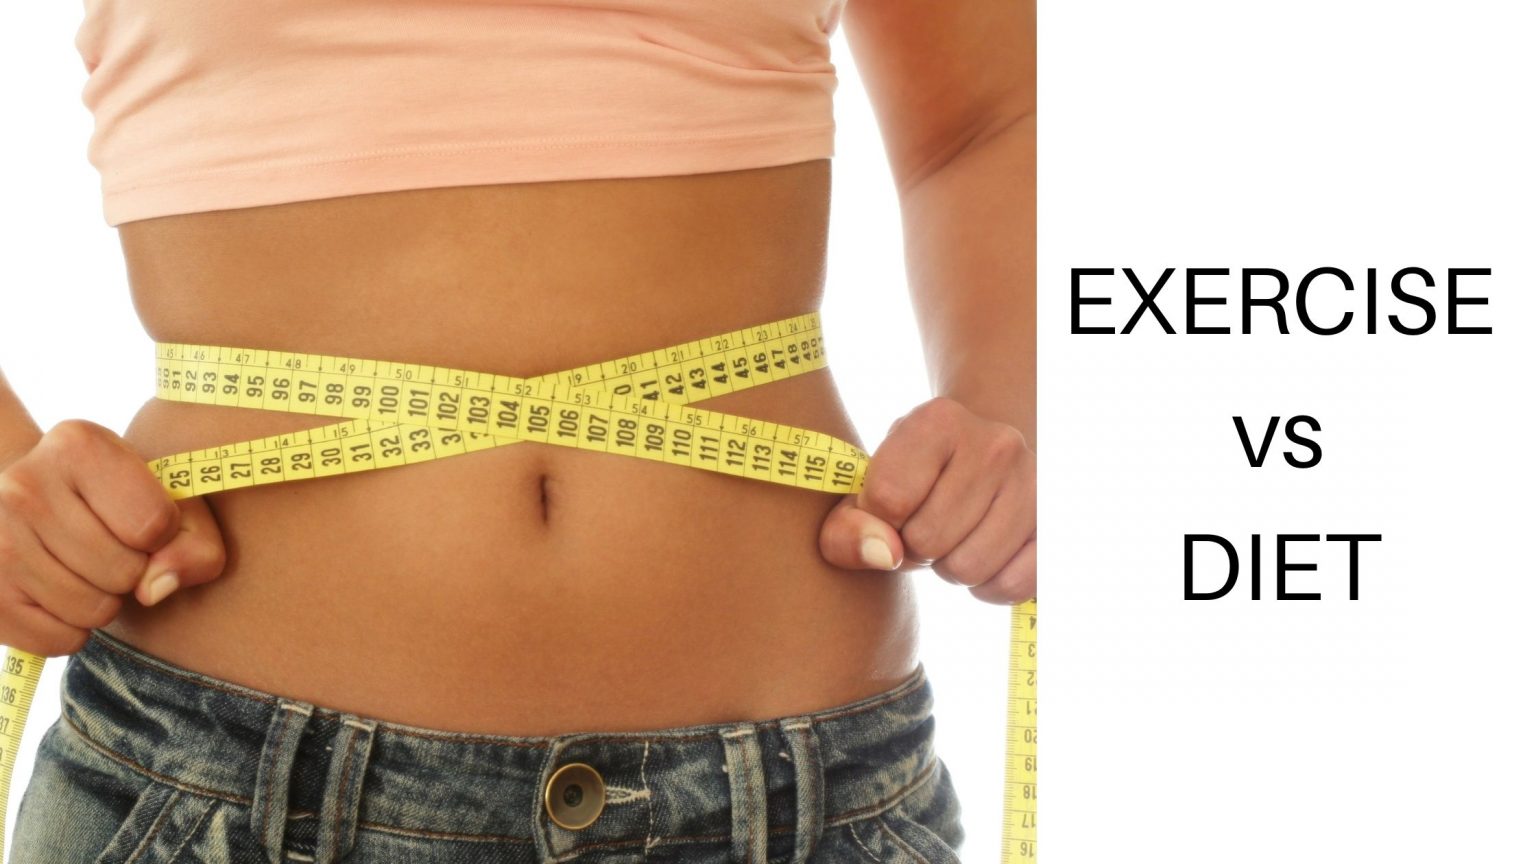 Exercise vs Diet For Weight Loss – which one is better for you?